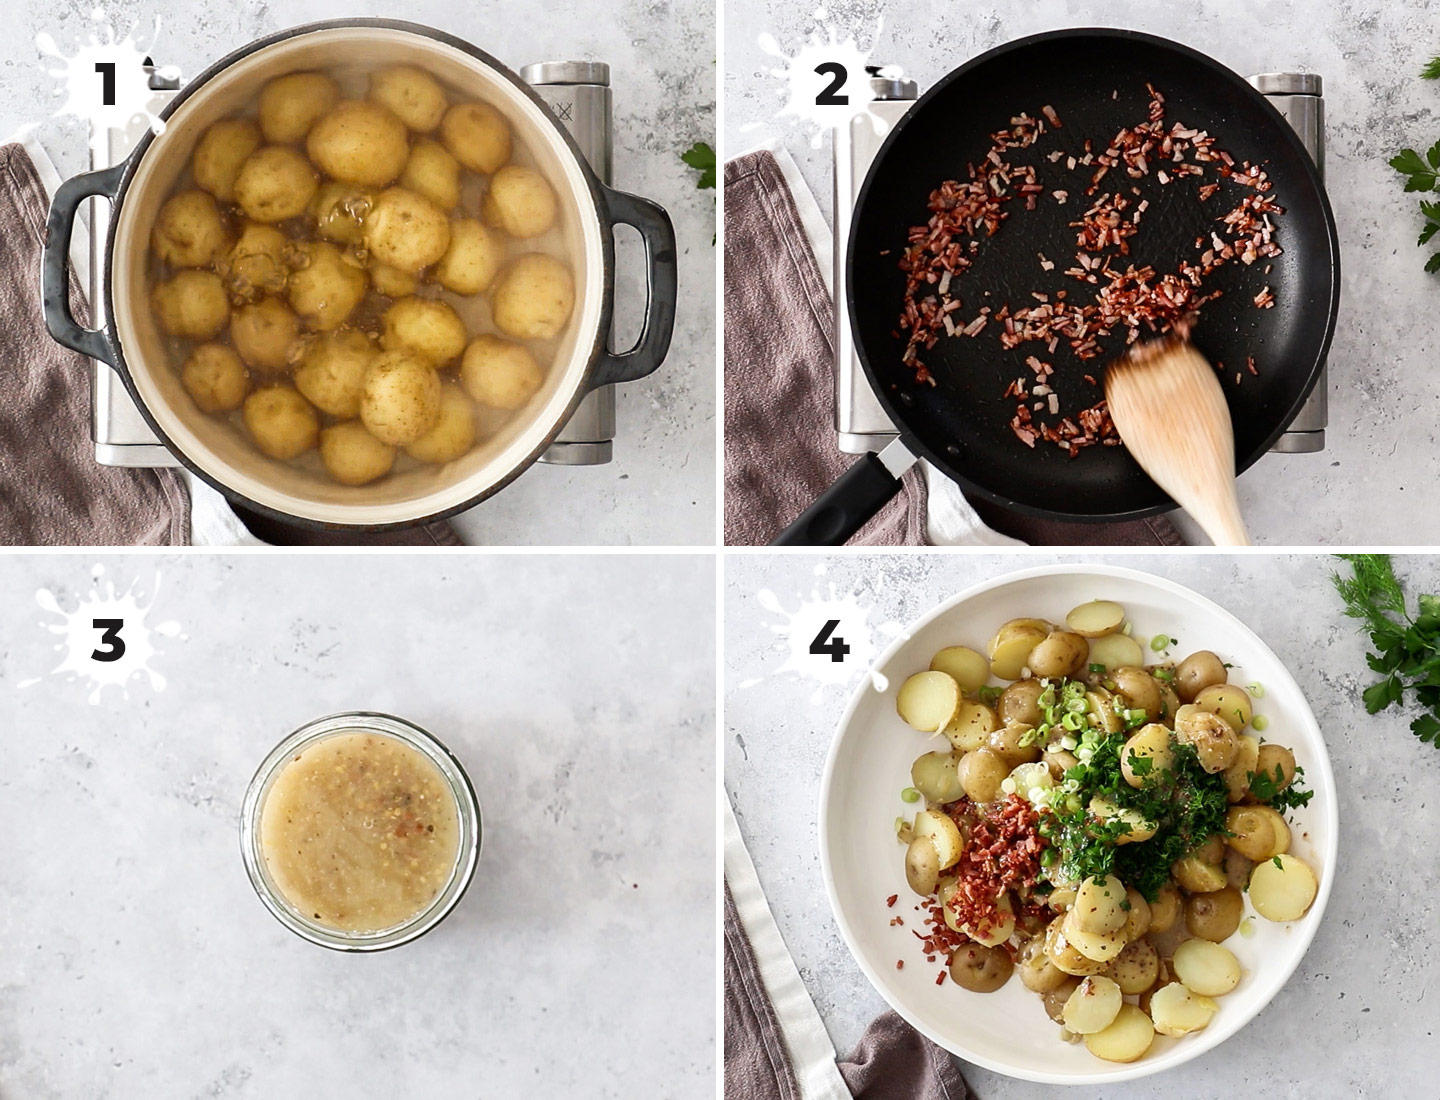 A collage showing how to make no mayo potato salad.